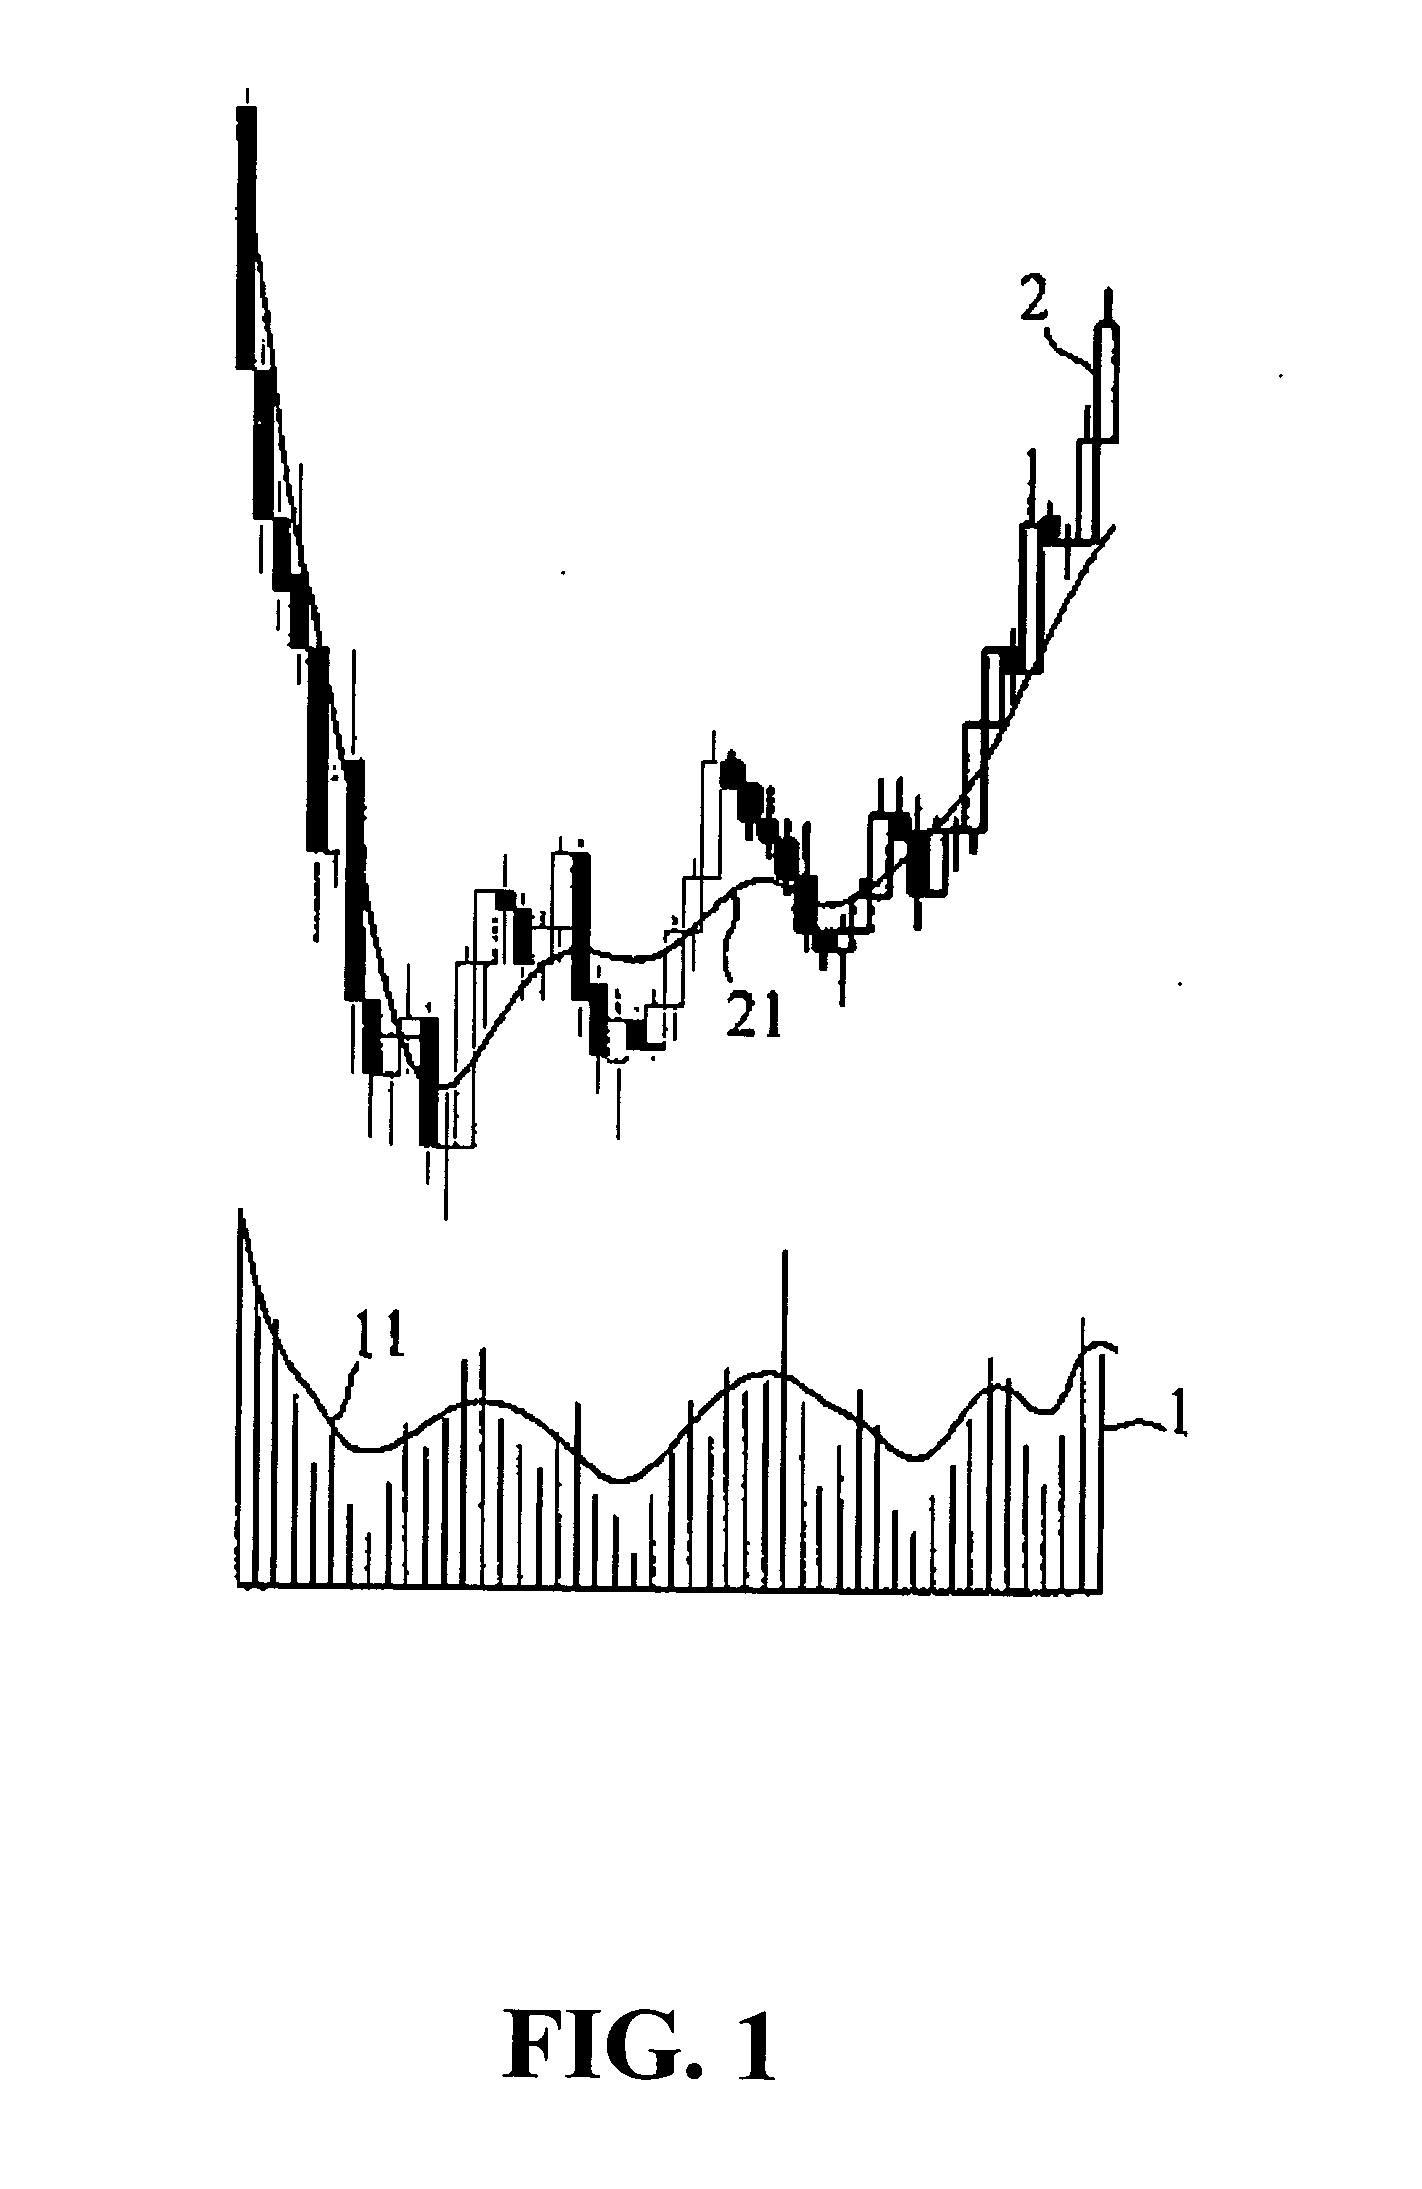 Method and system for monitoring volume information in stock market